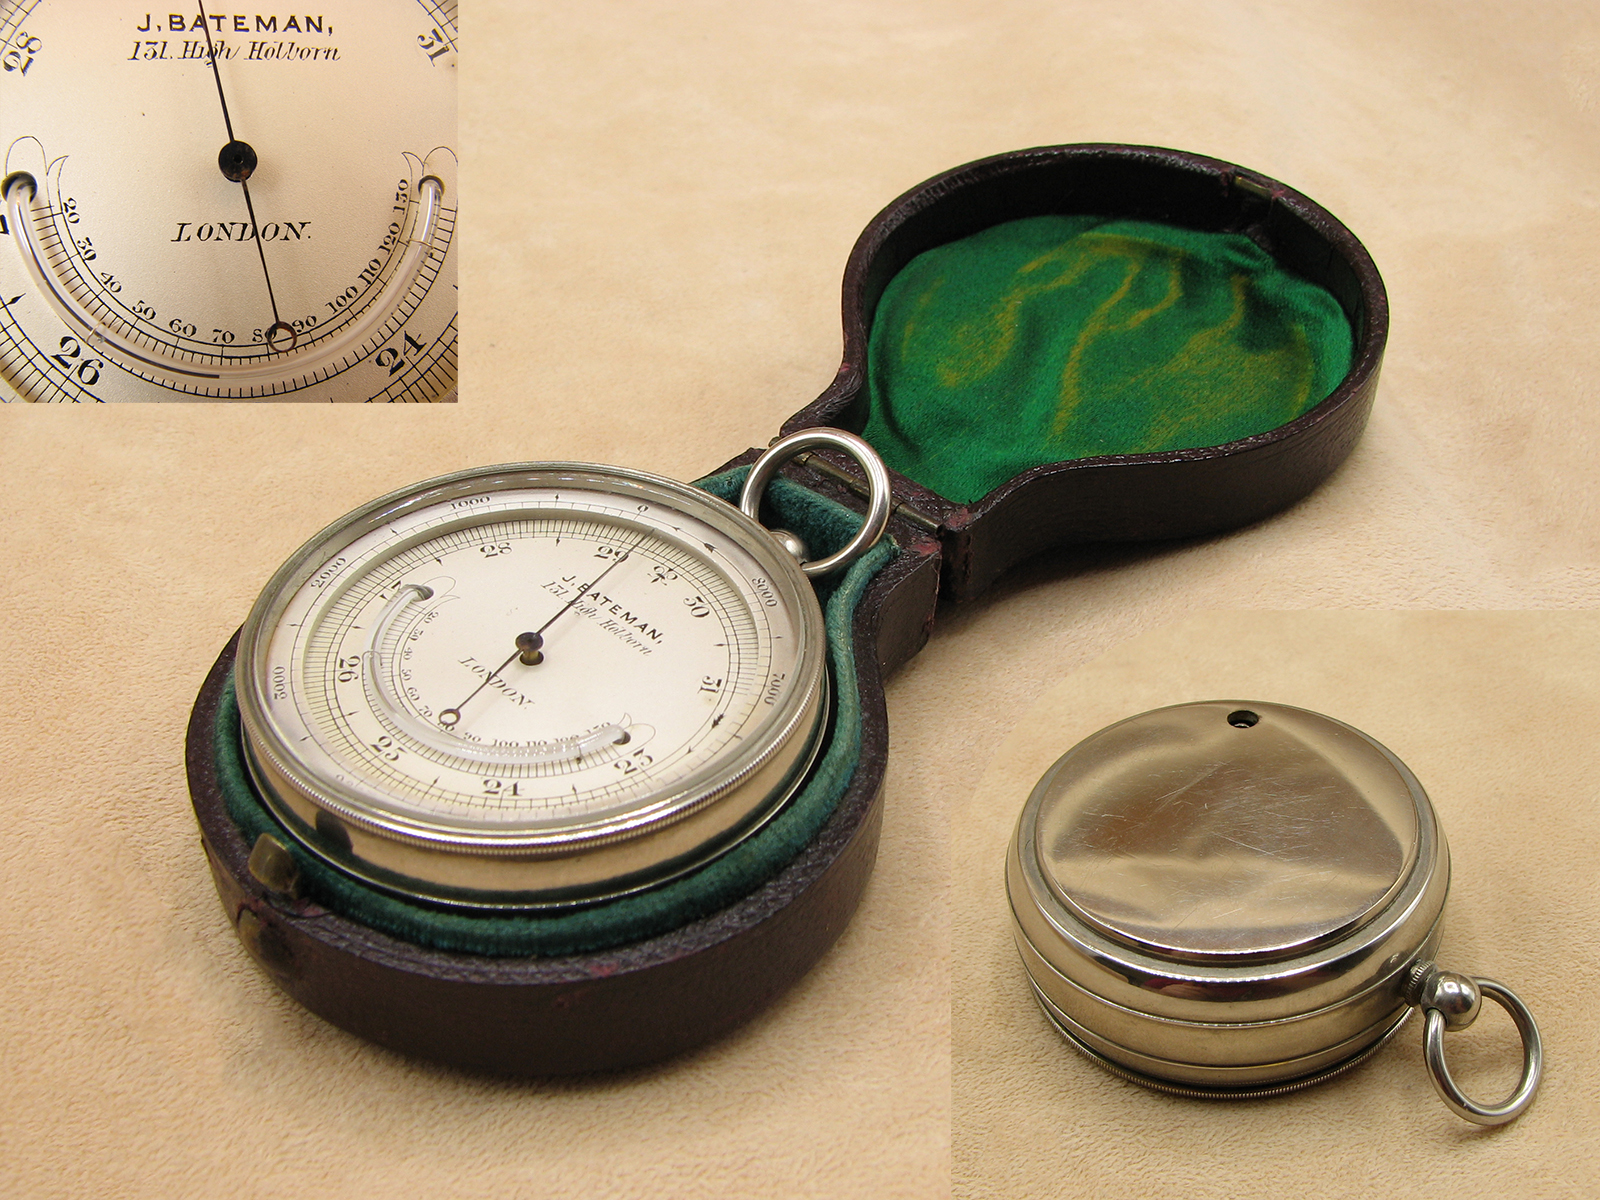 Late 19th century pocket barometer with thermometer 
signed J BATEMAN 131 High Holborn